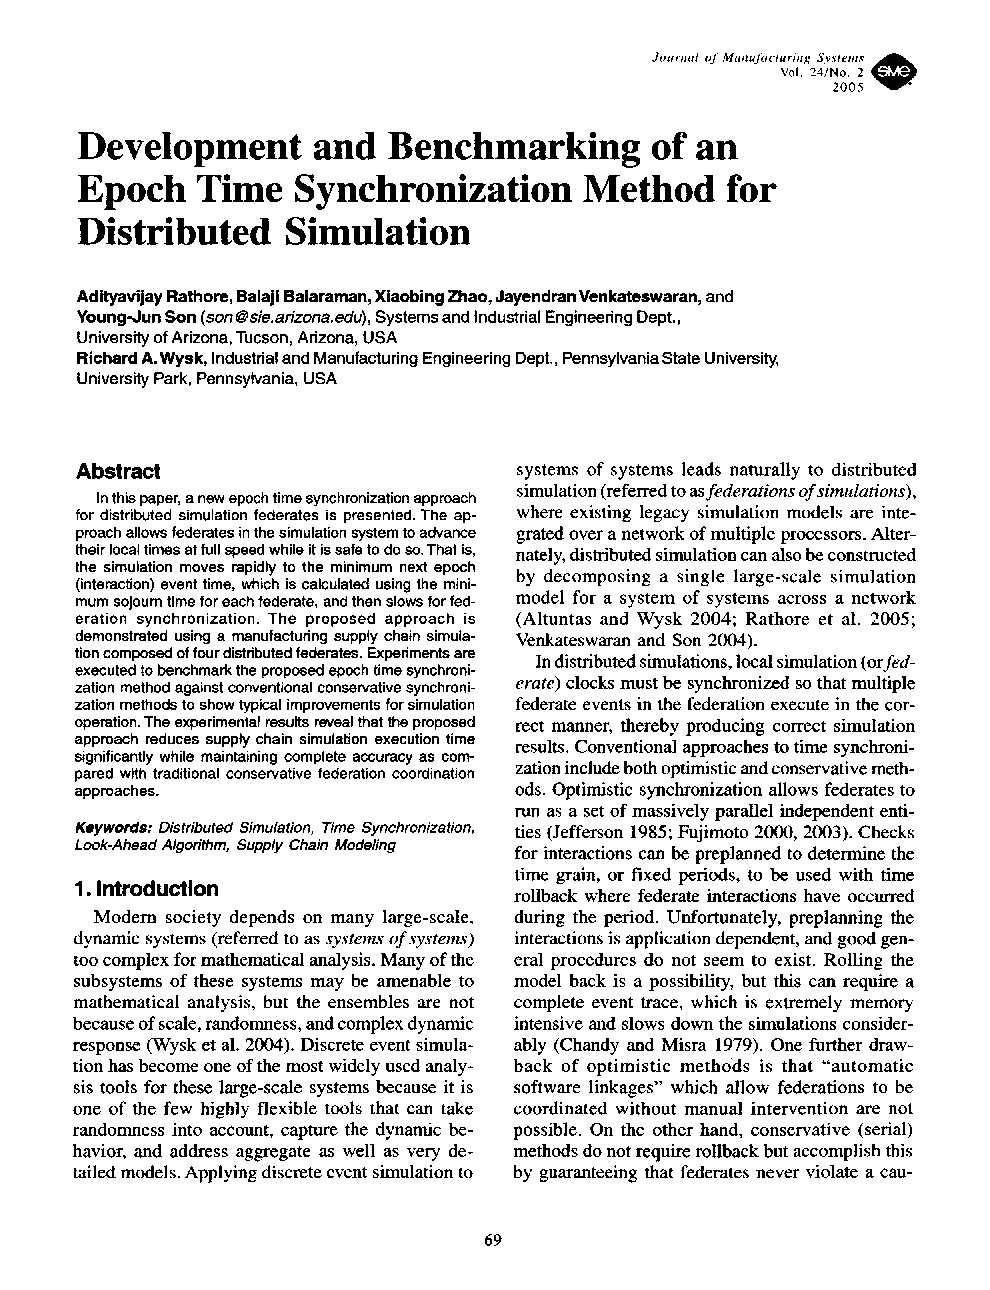 Development and benchmarking of an epoch time synchronization method for distributed simulation